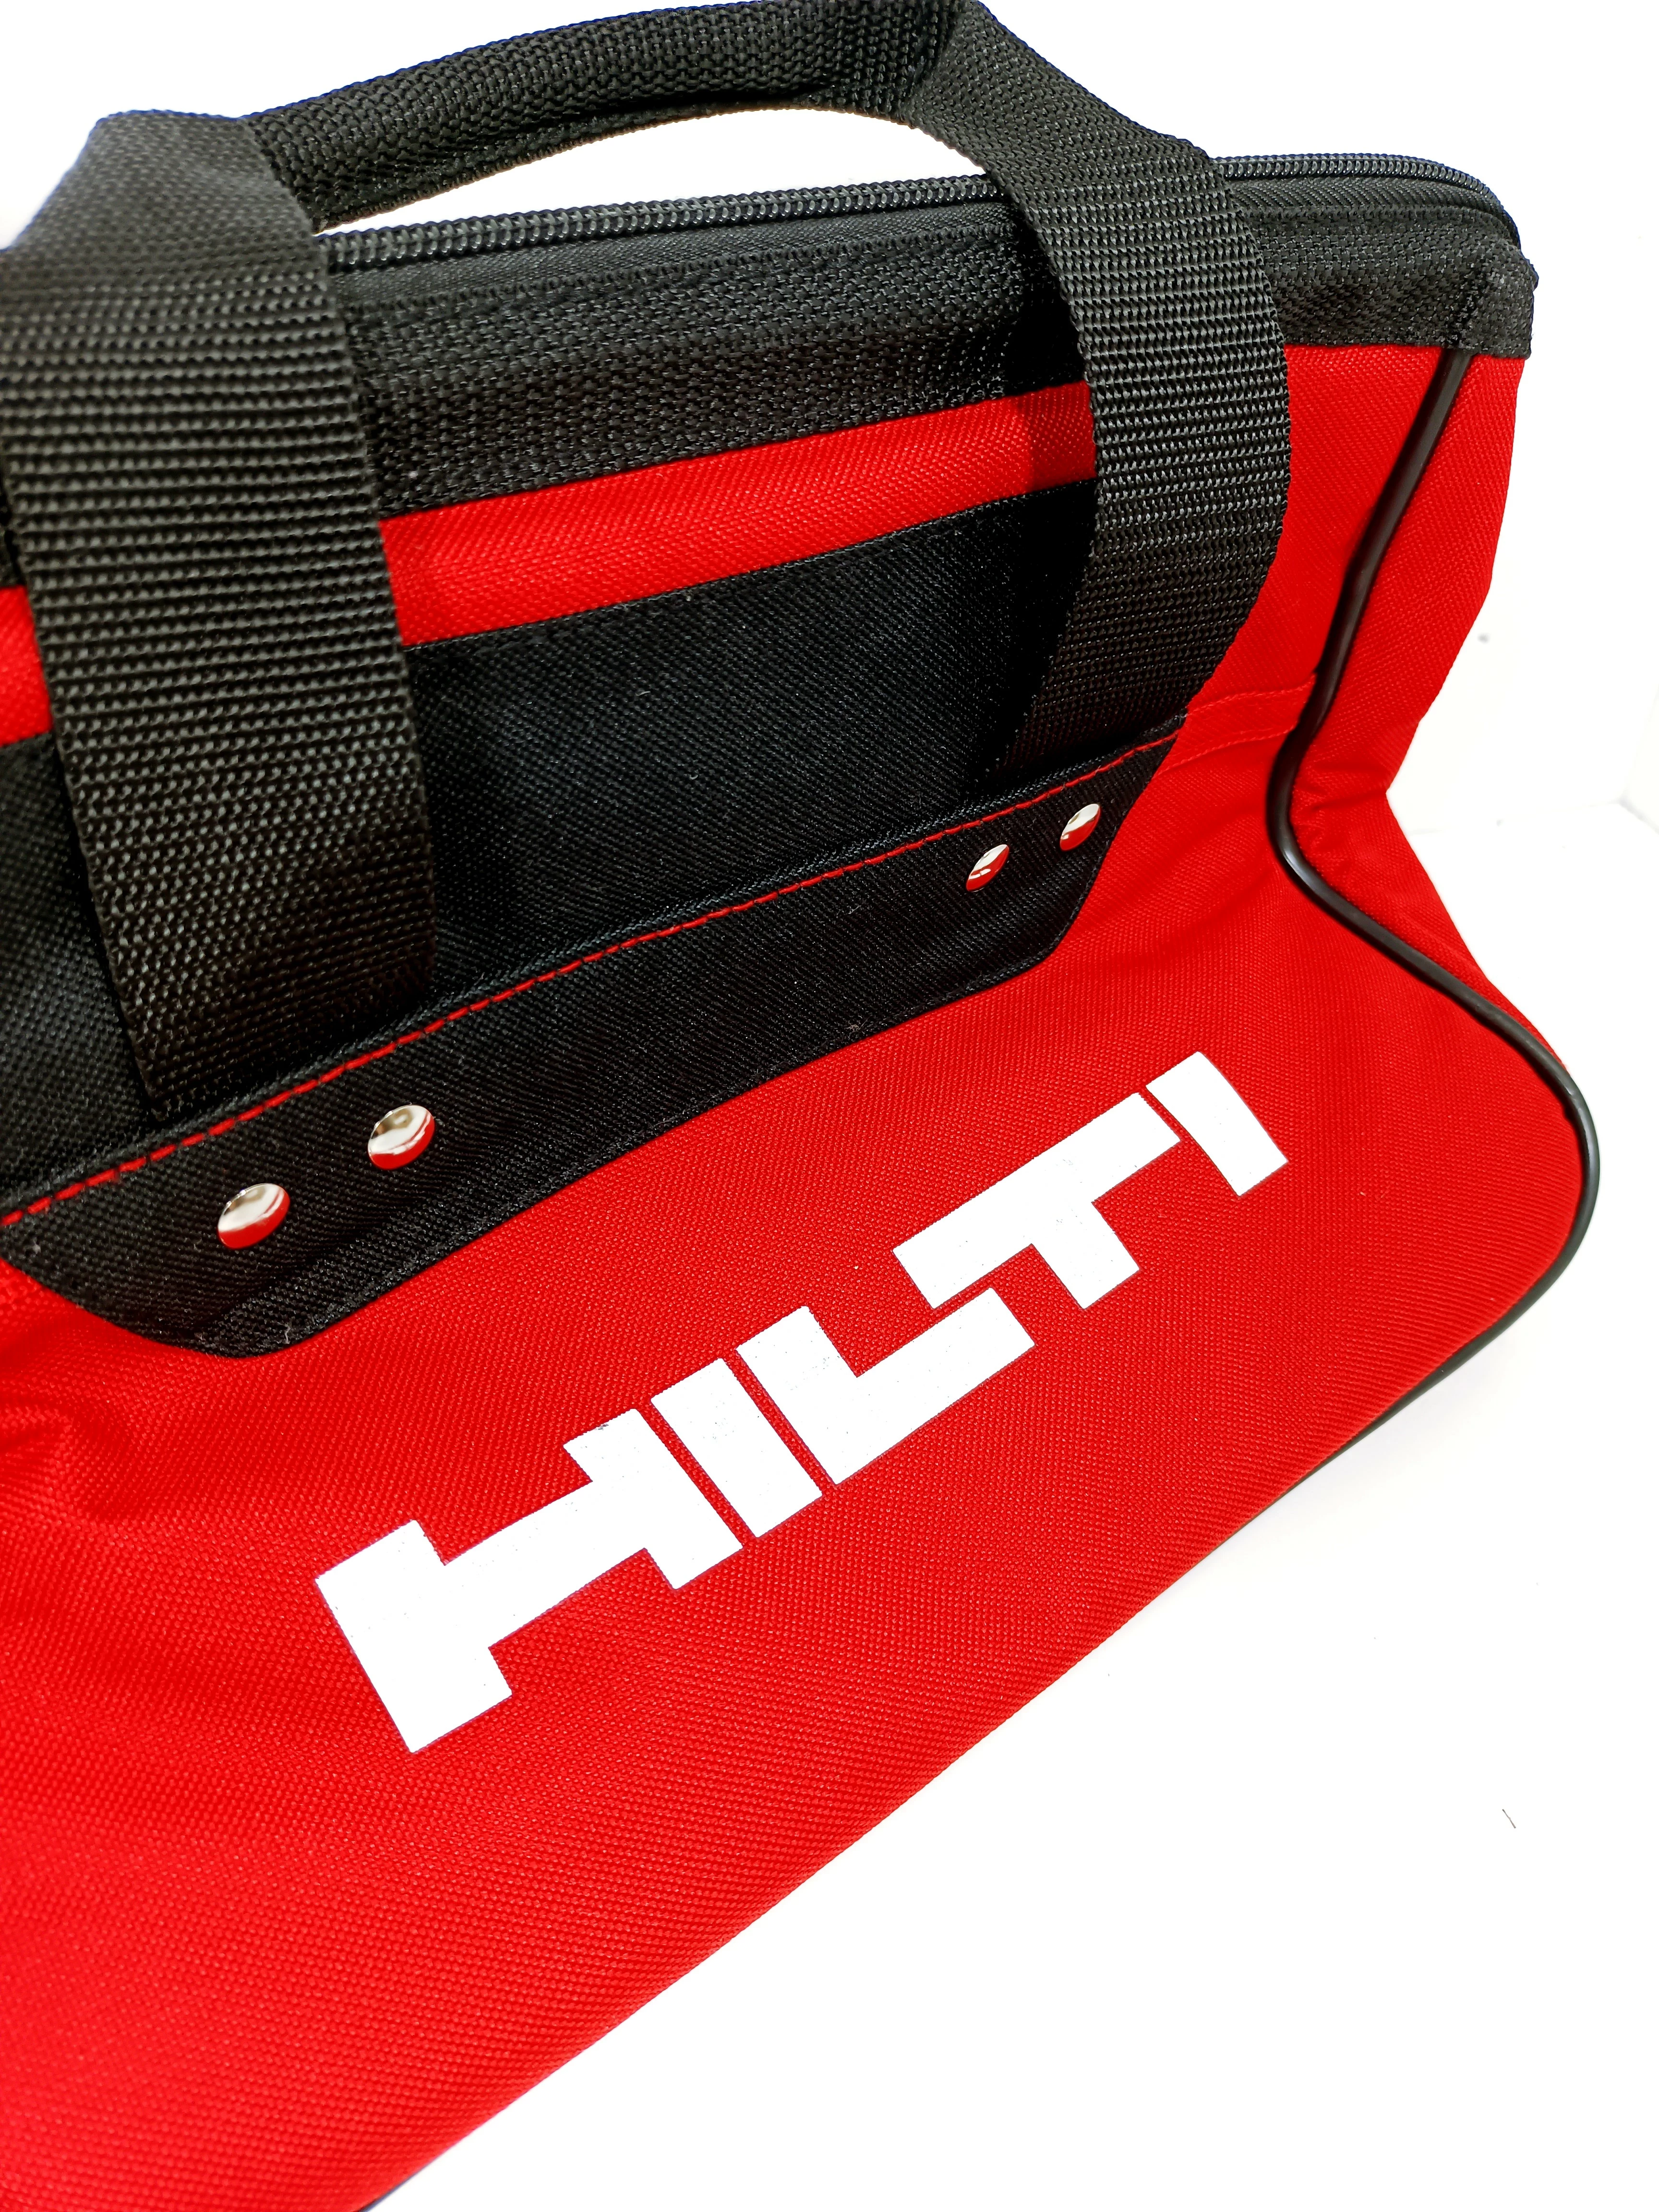 Hilti tool bag for Sale in Ripon, CA - OfferUp